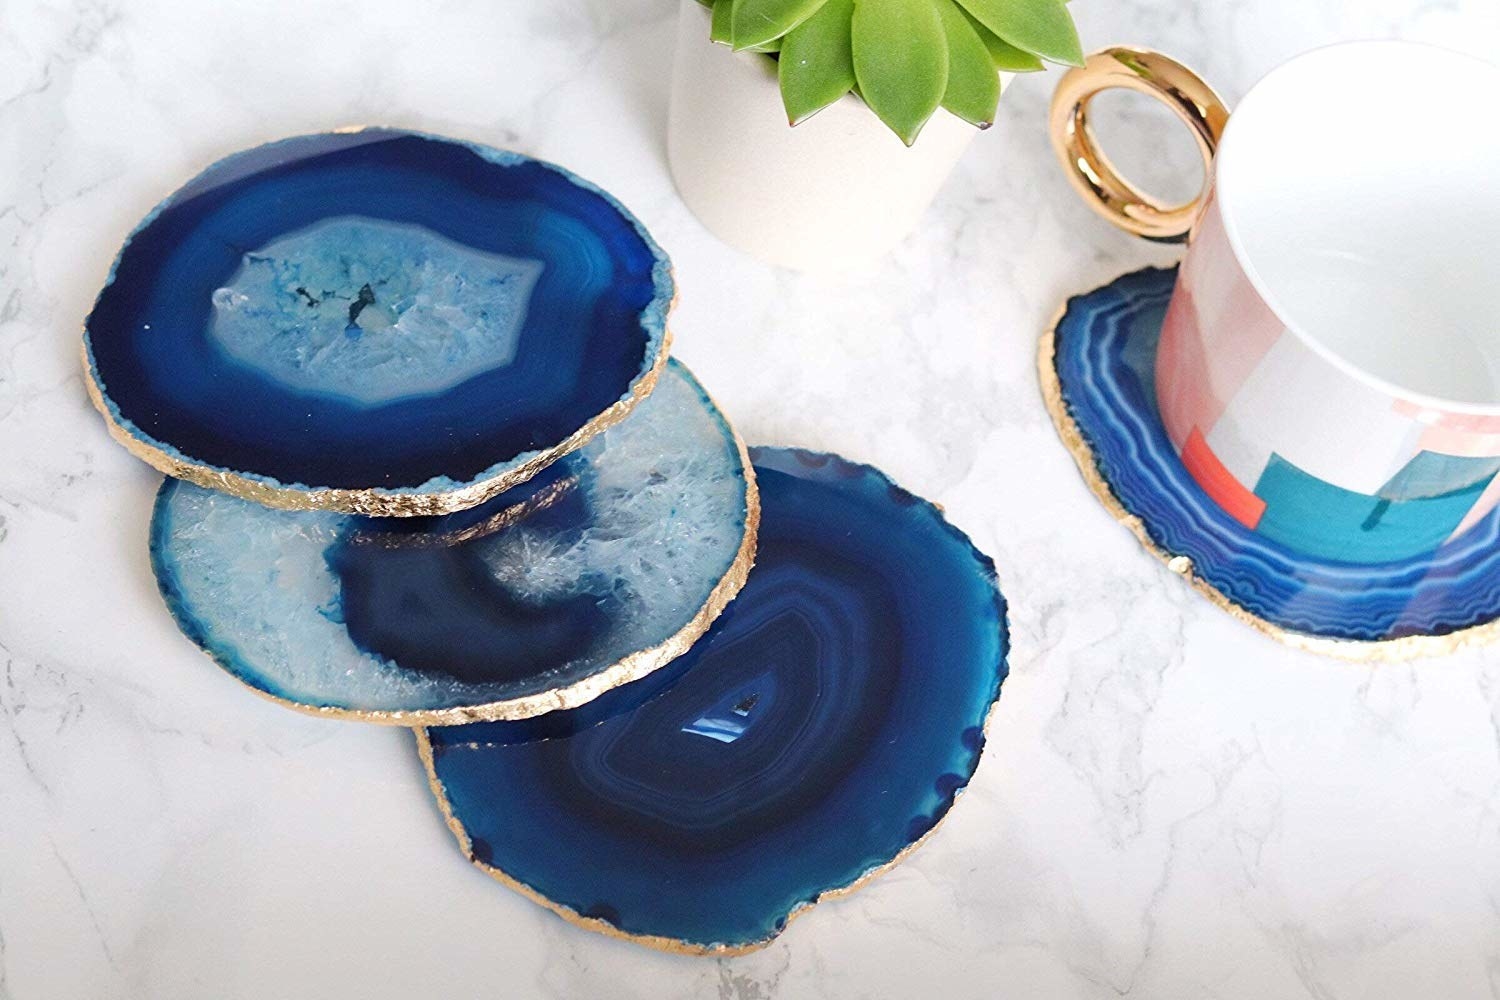 Blue-gold agate coasters and a mug kept on one of them.